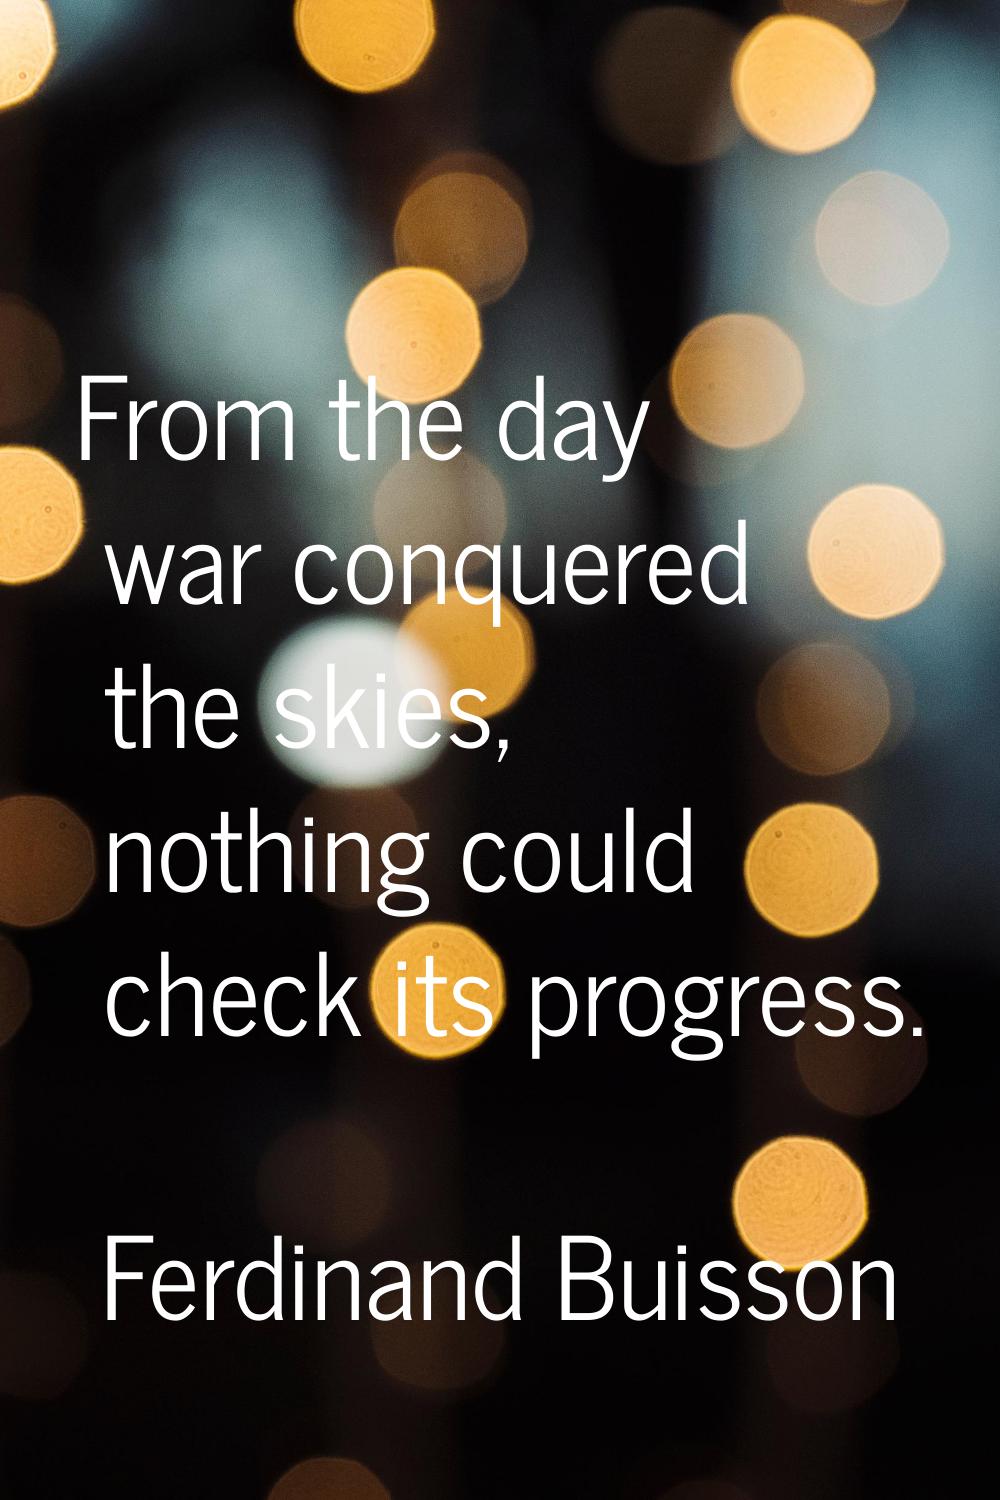 From the day war conquered the skies, nothing could check its progress.